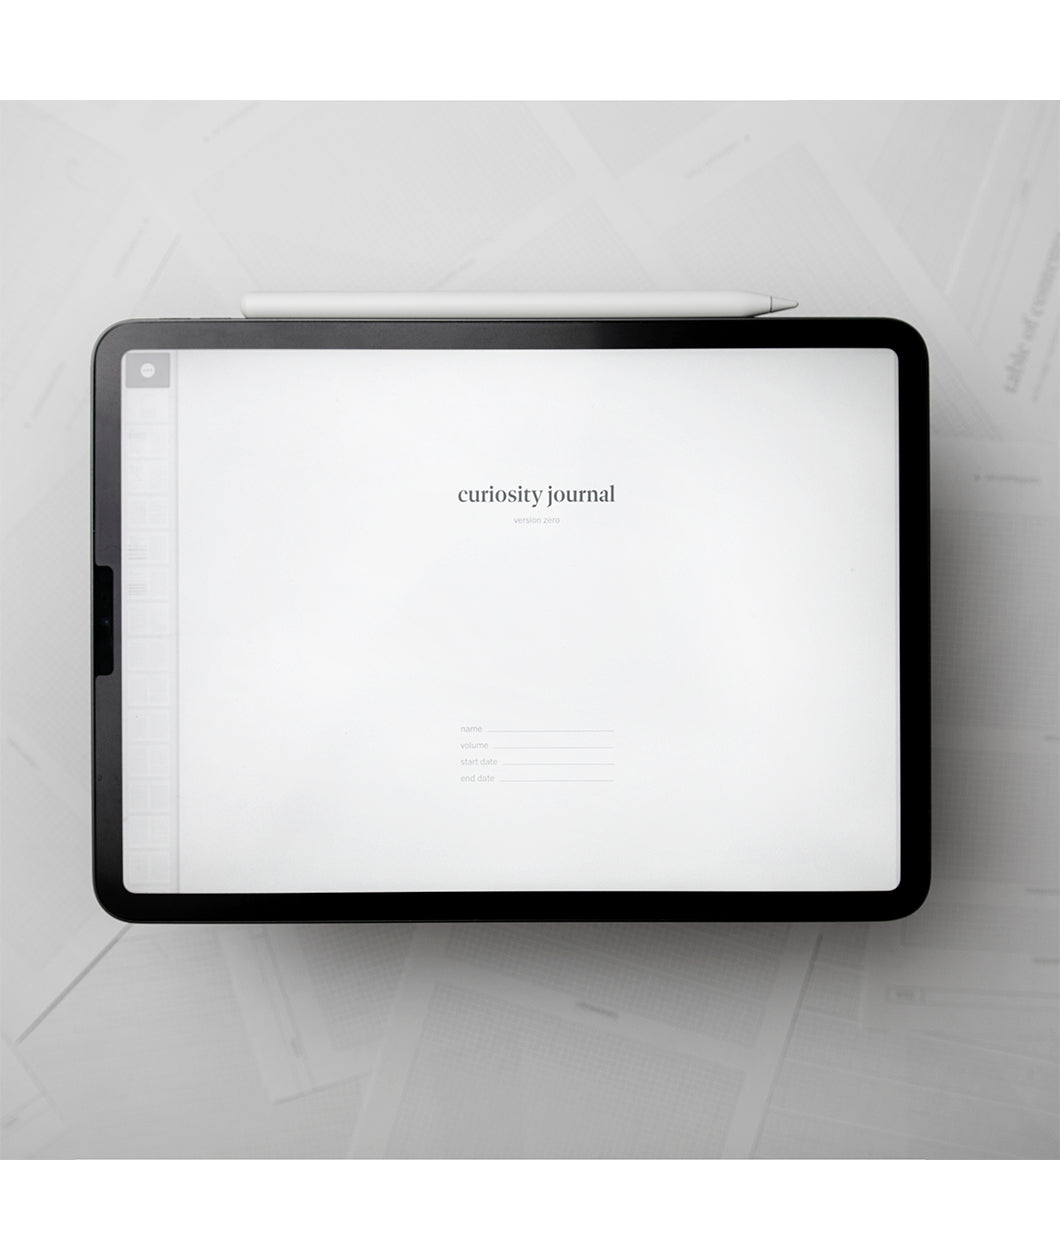 A tablet with a white background and small text in the center that says 